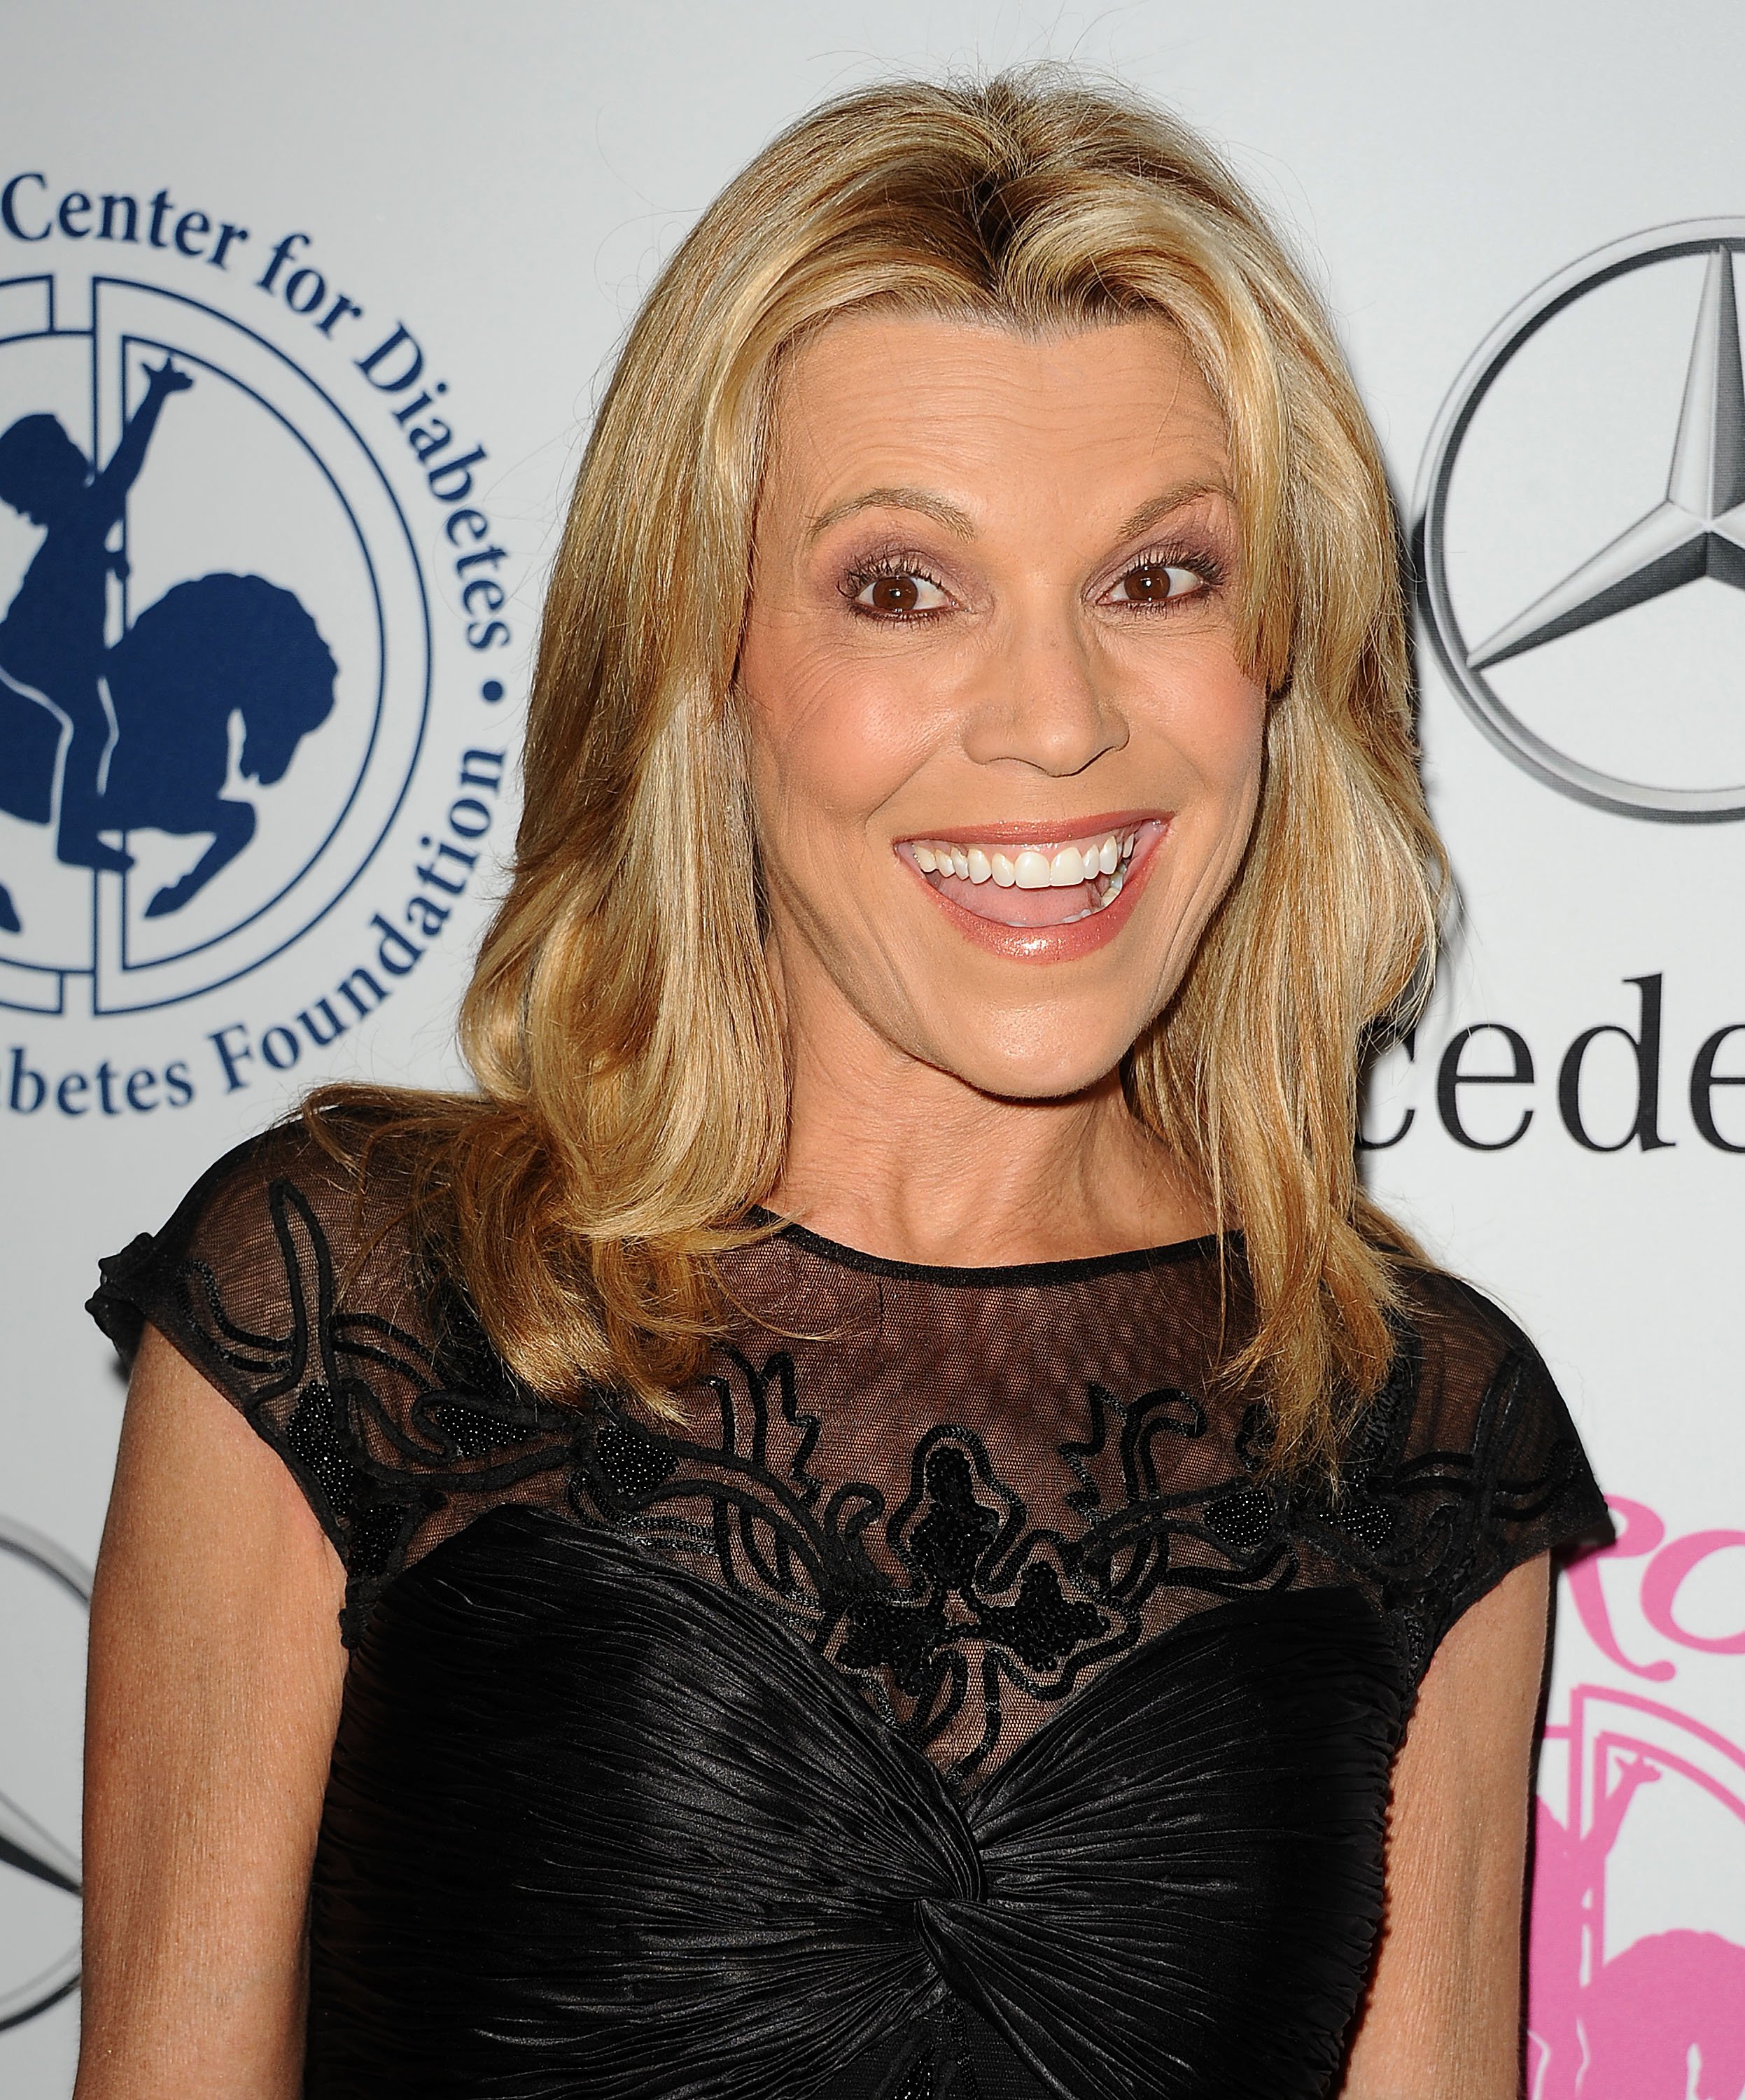 Vanna White attends the 2014 Carousel of Hope Ball at The Beverly Hilton Hotel on October 11, 2014 in Beverly Hills, California | Photo: Getty Images